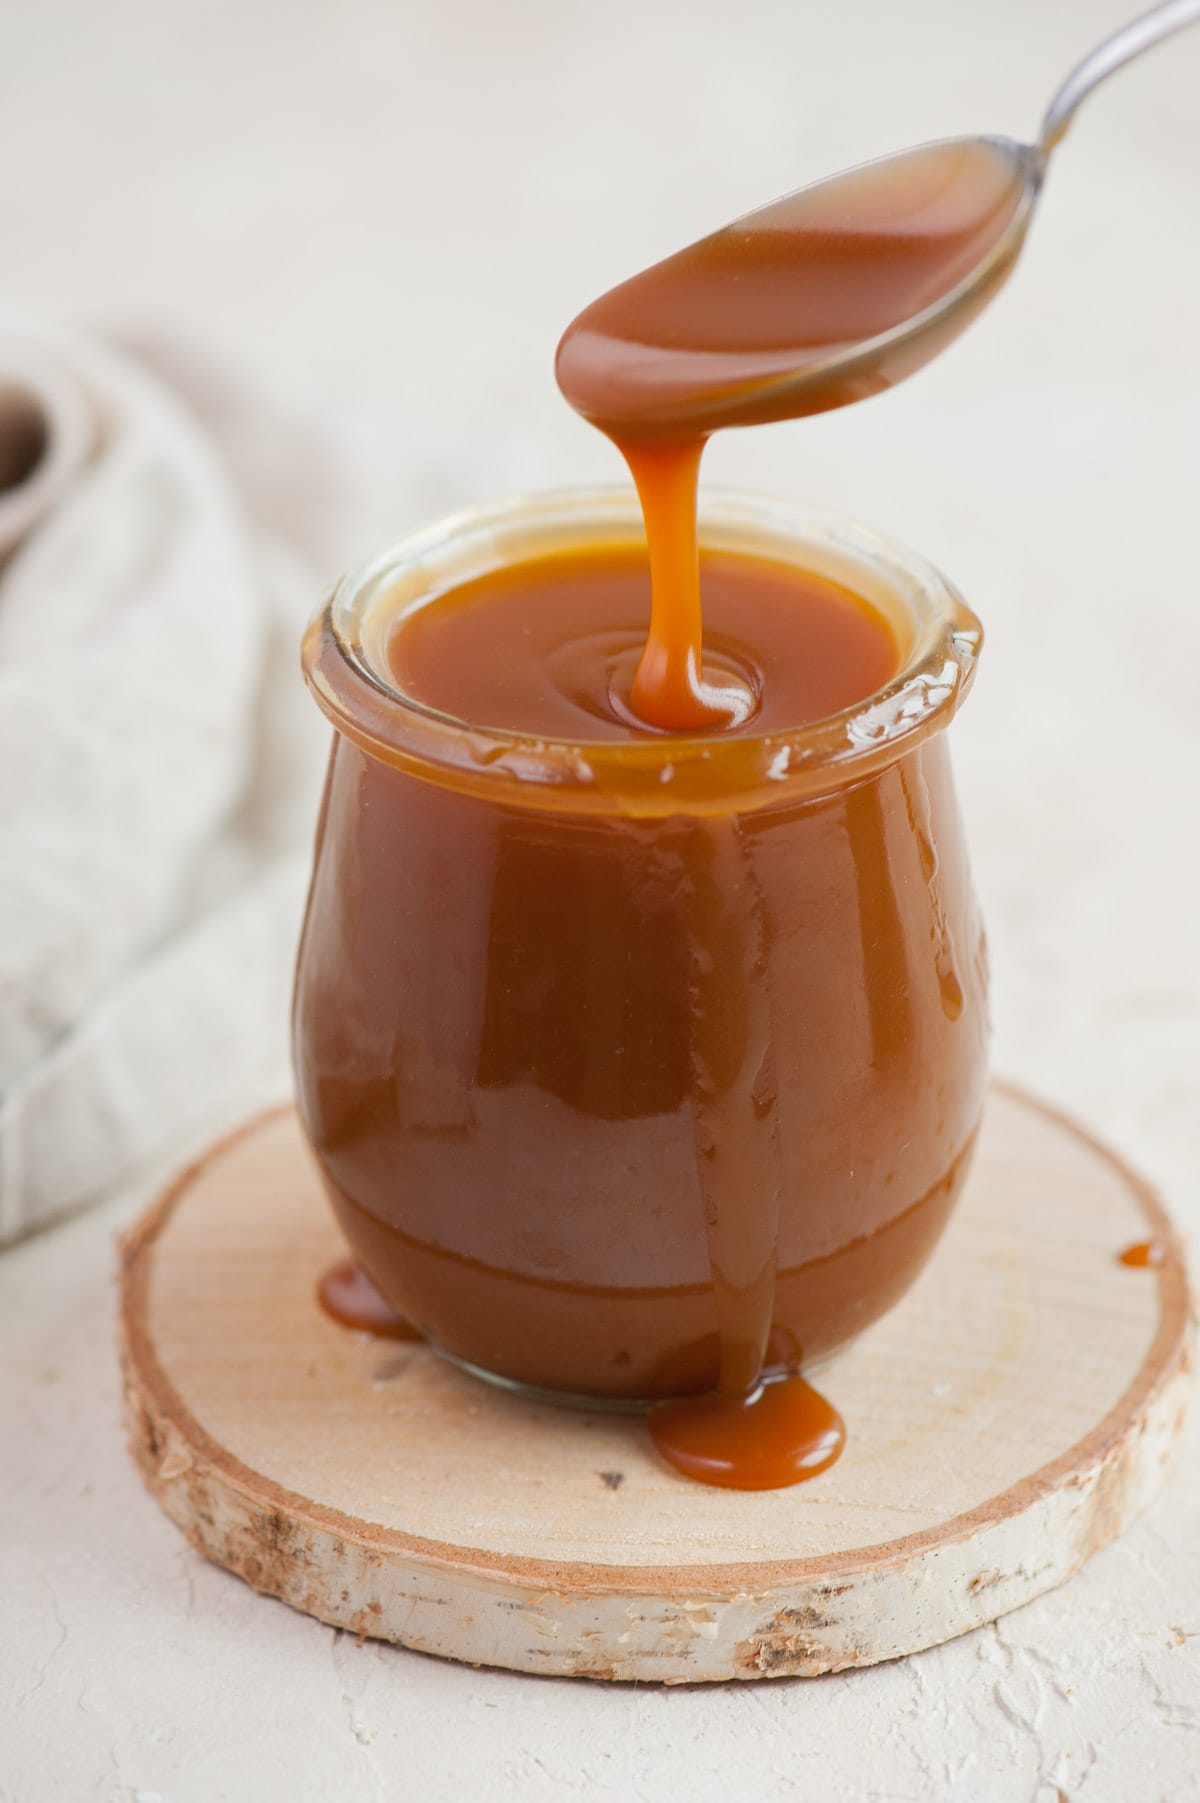 Easy salted caramel sauce recipe - Everyday Delicious